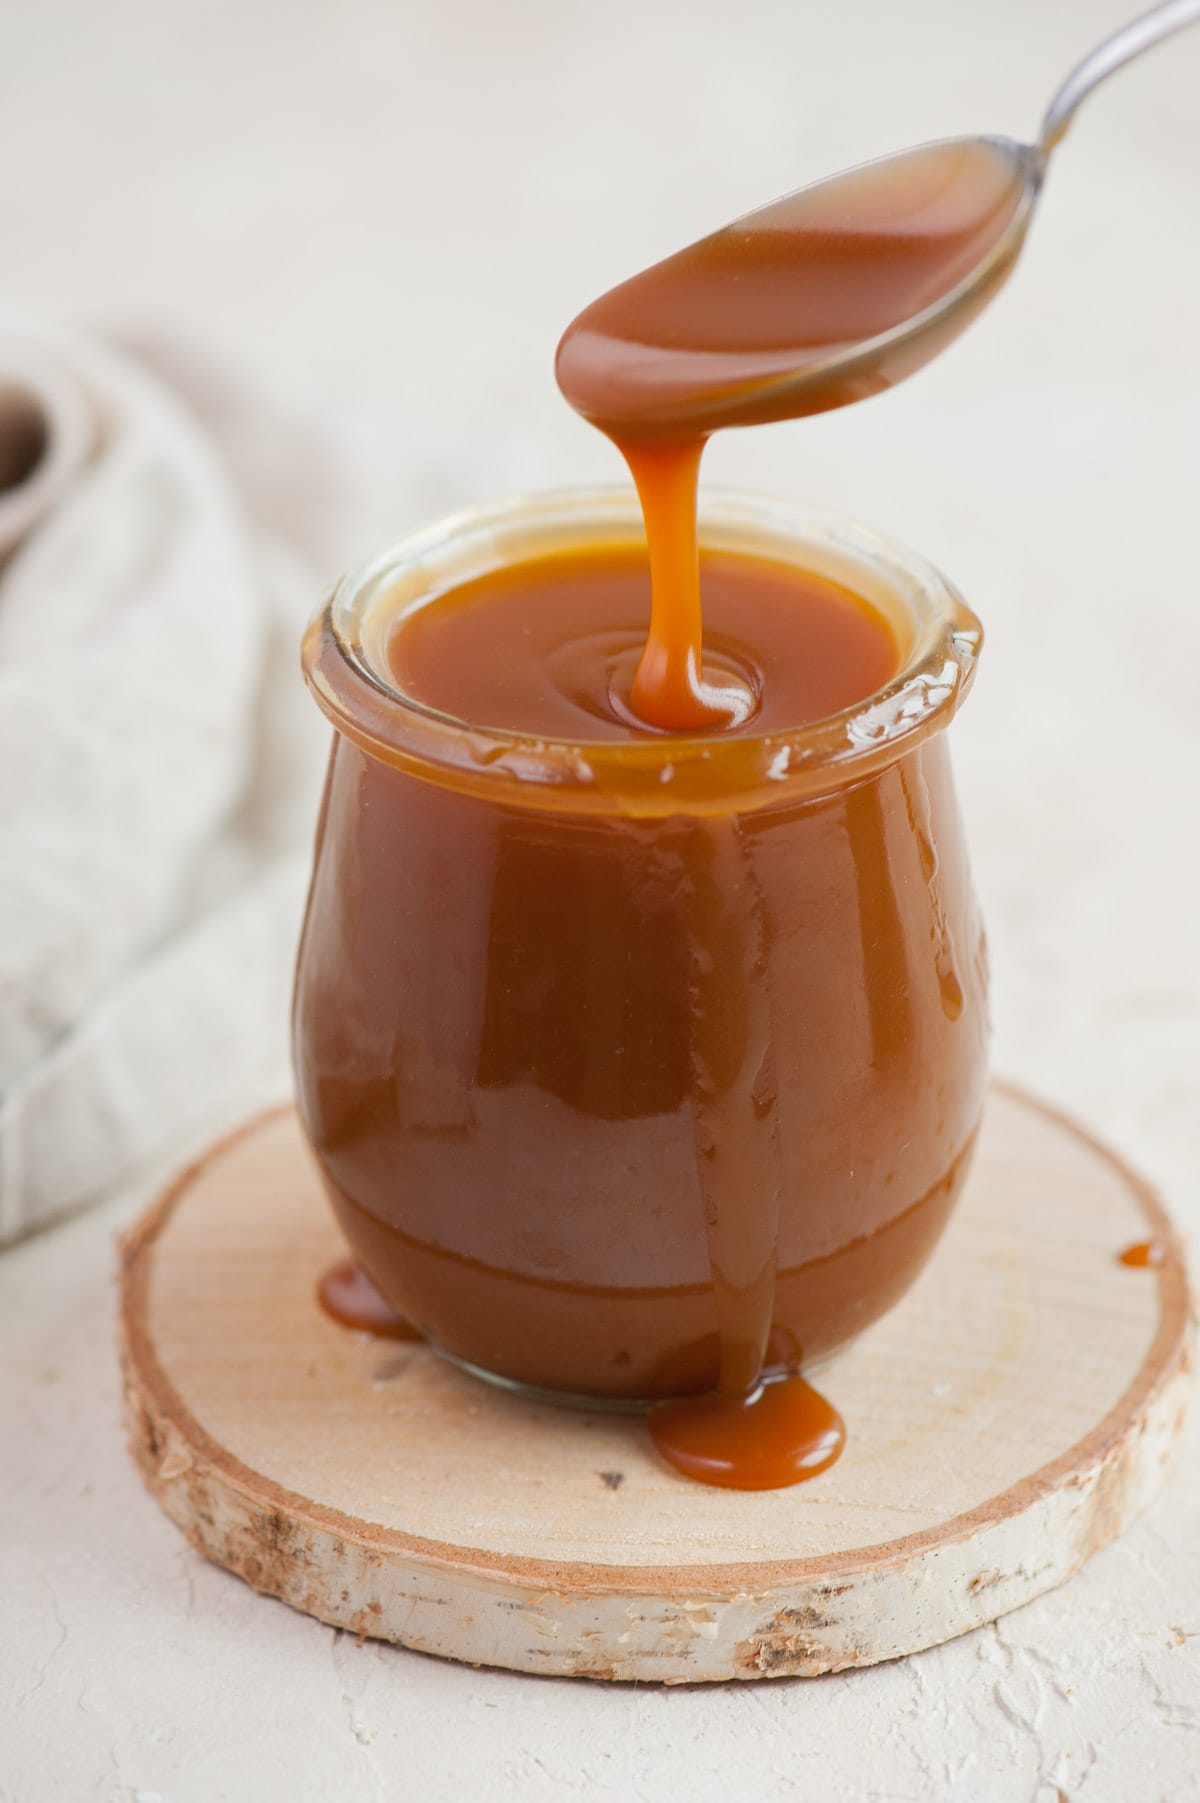 Easy salted caramel sauce recipe - Everyday Delicious